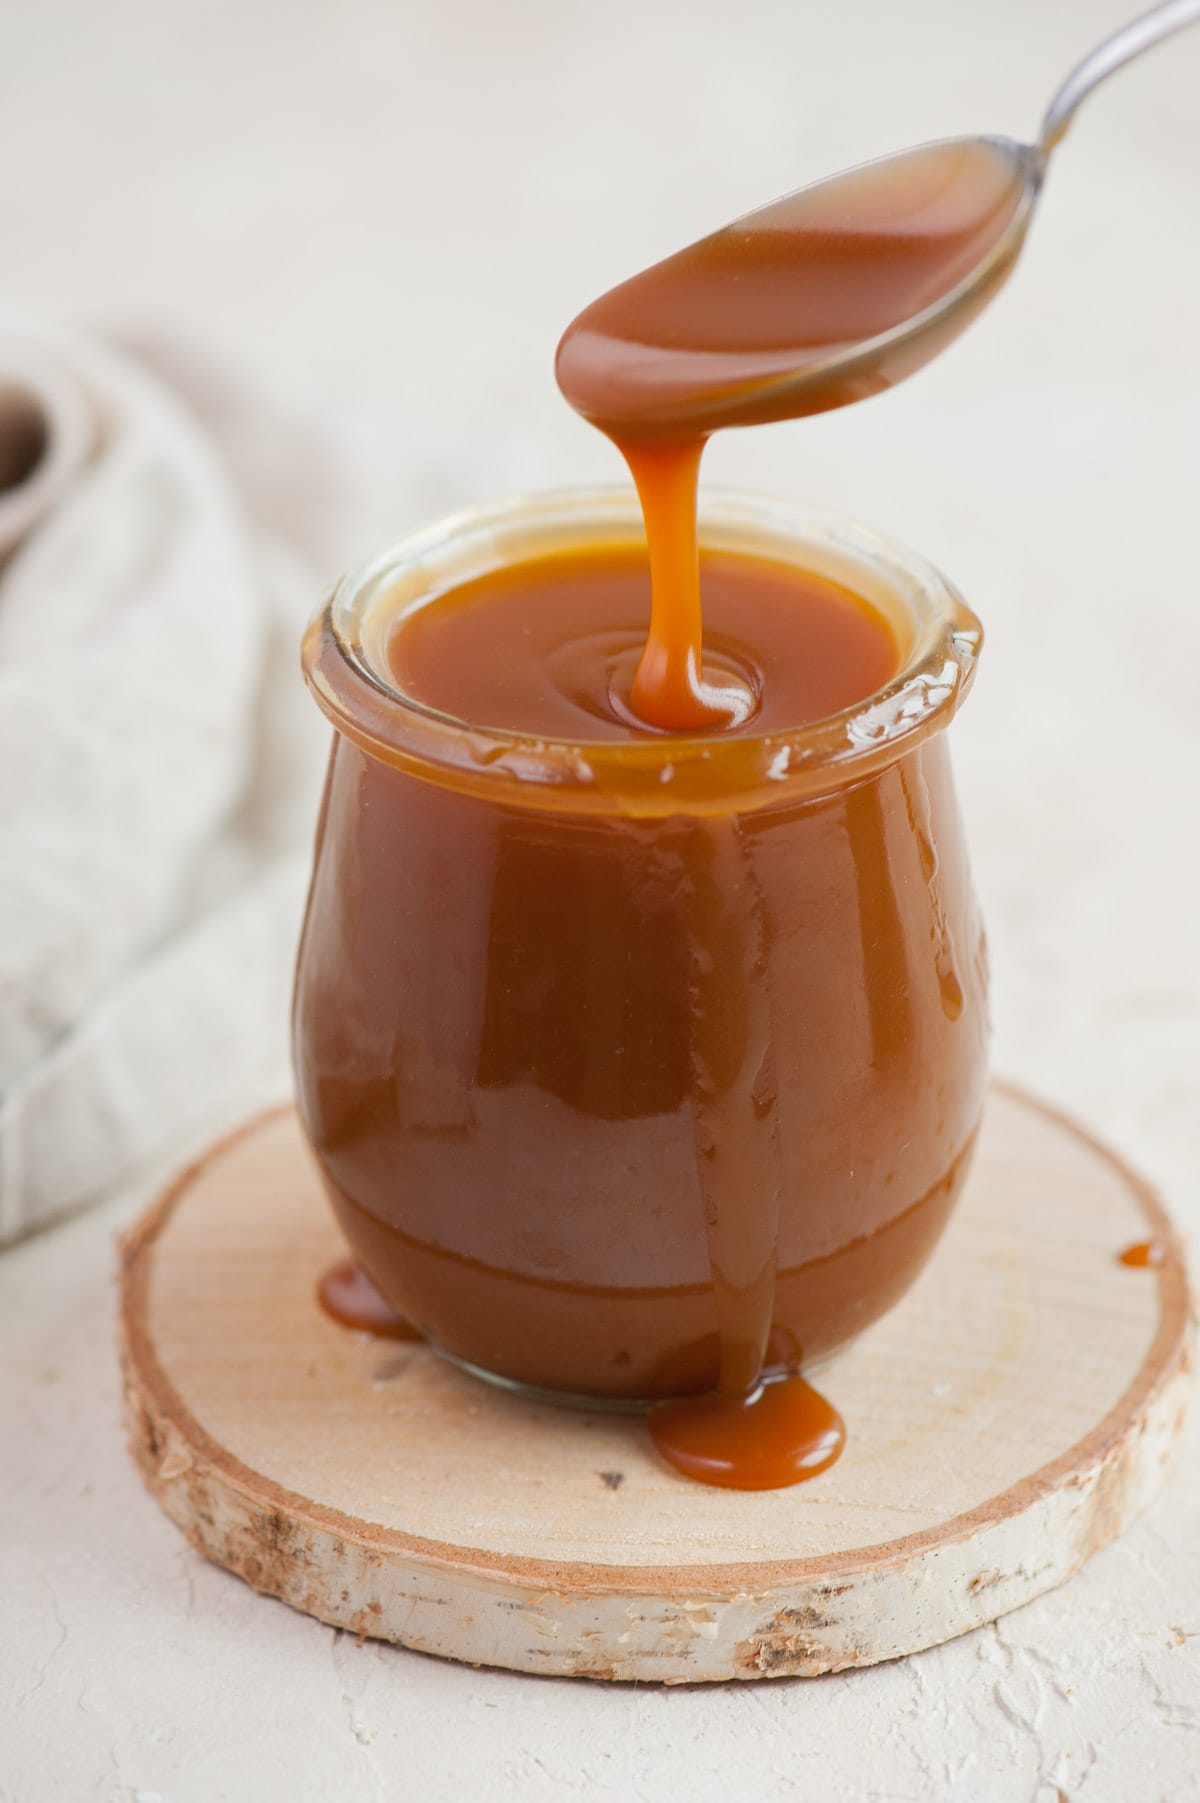 Easy salted caramel sauce recipe - Everyday Delicious